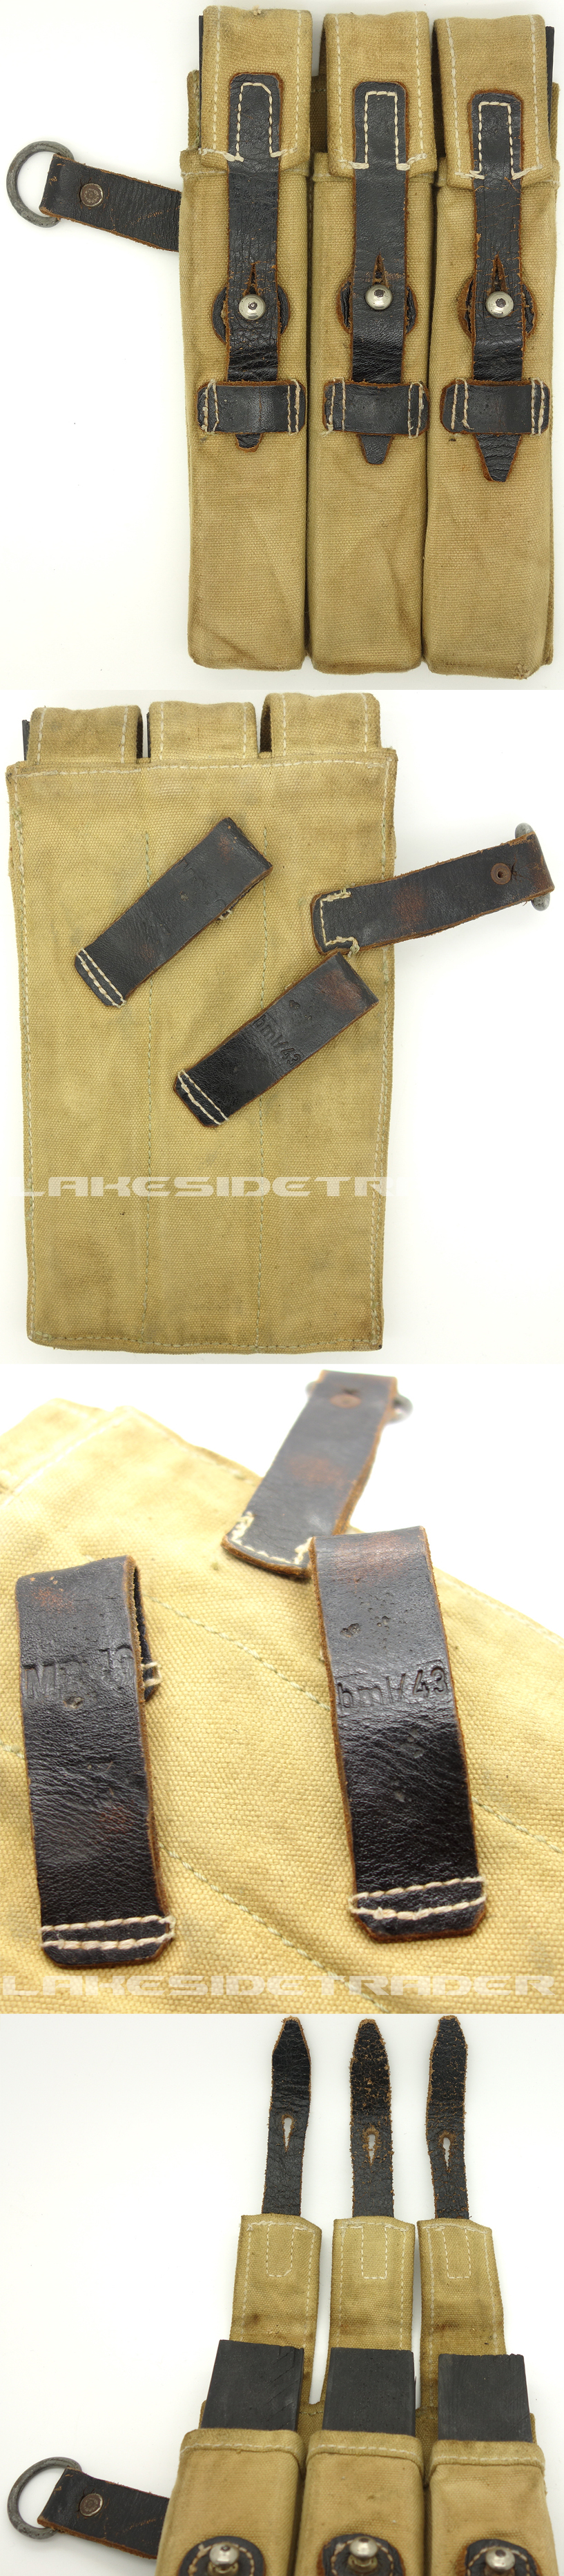 Reinactor MP-38/40 Ammo Pouch